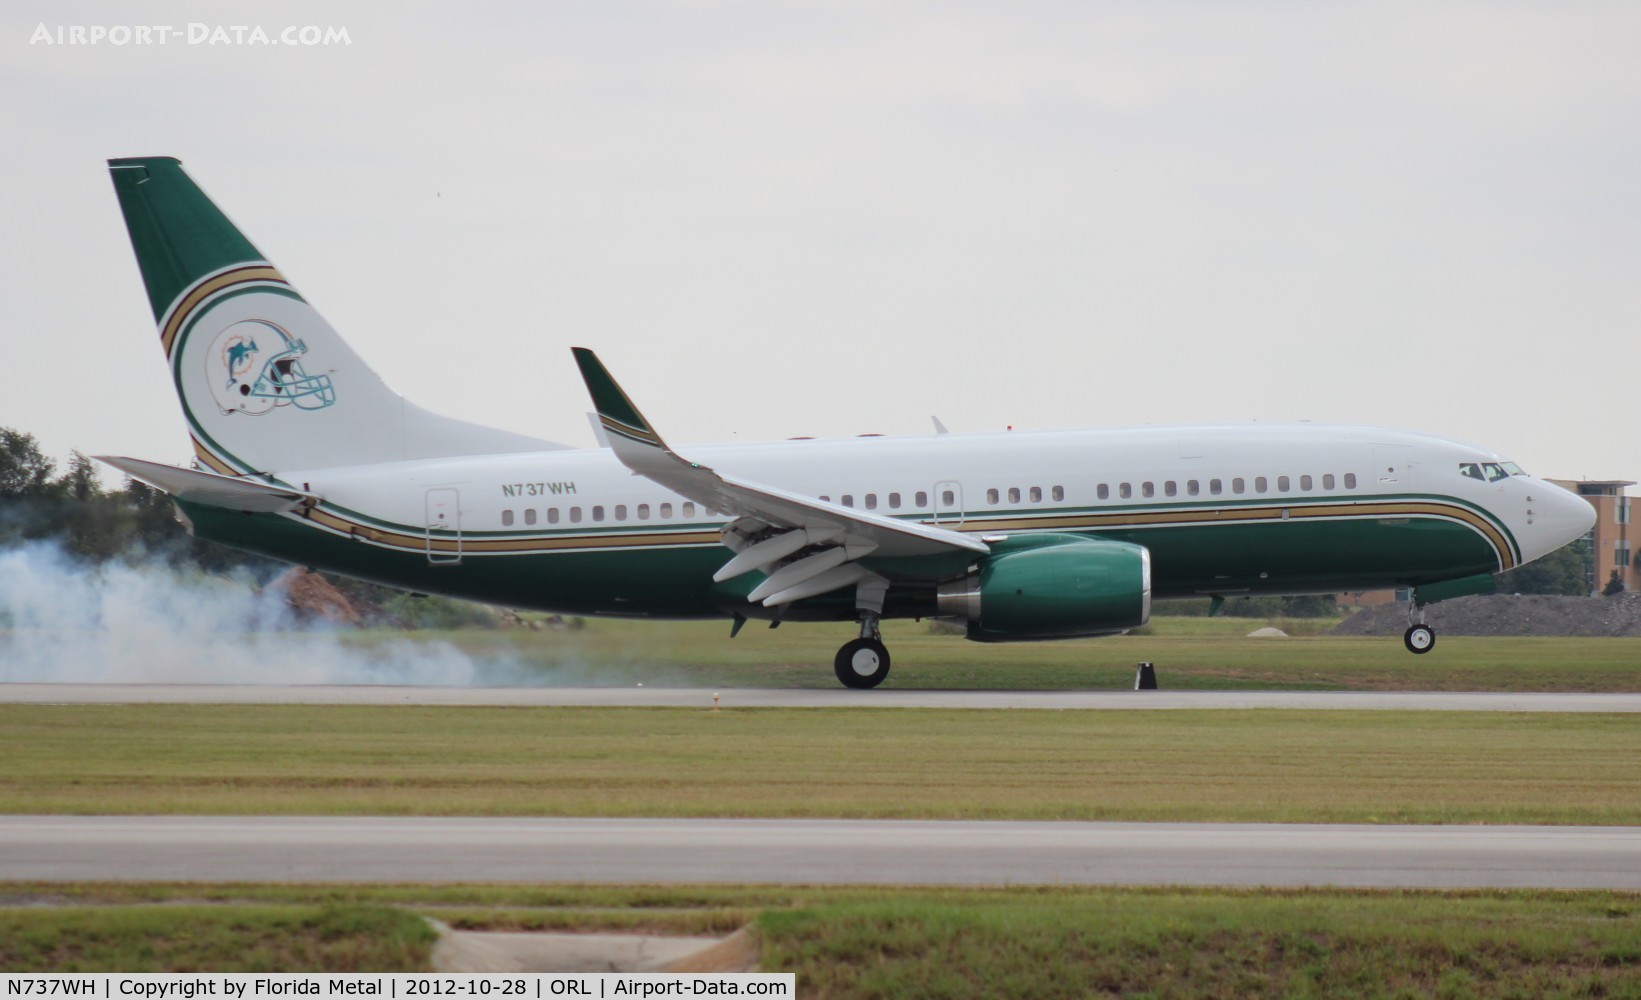 N737WH, 1998 Boeing 737-75T BBJ C/N 29142, Former Miami Dolphins BBJ, has now been taken over by Devoss (Amway/Orlando Magic NBA) wearing new reg N260DV